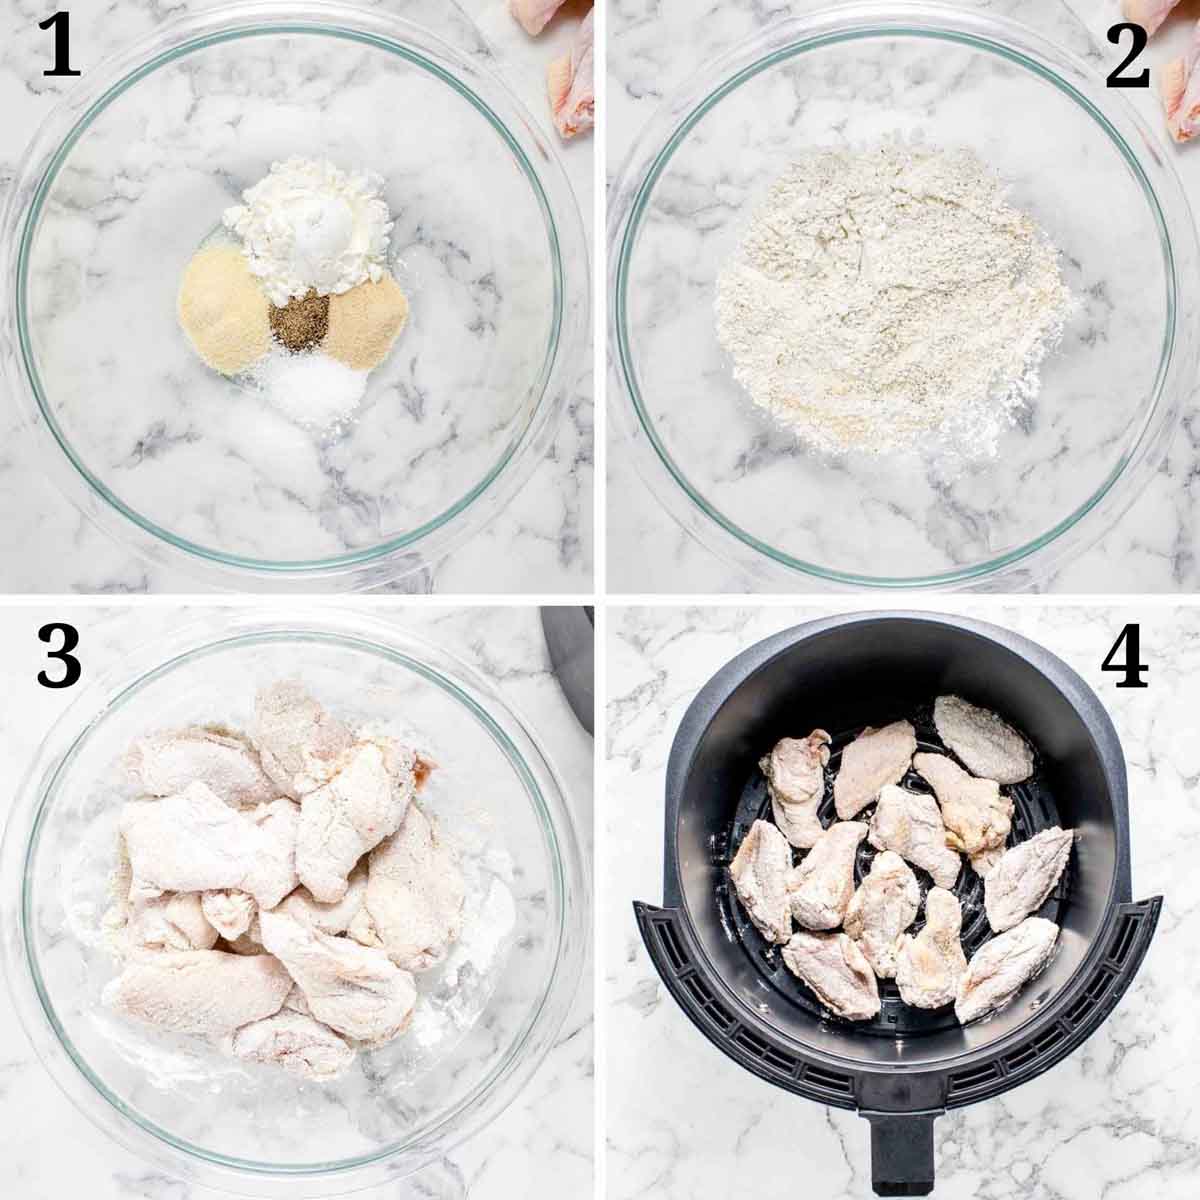 four images showing how to prepare and cook the wings